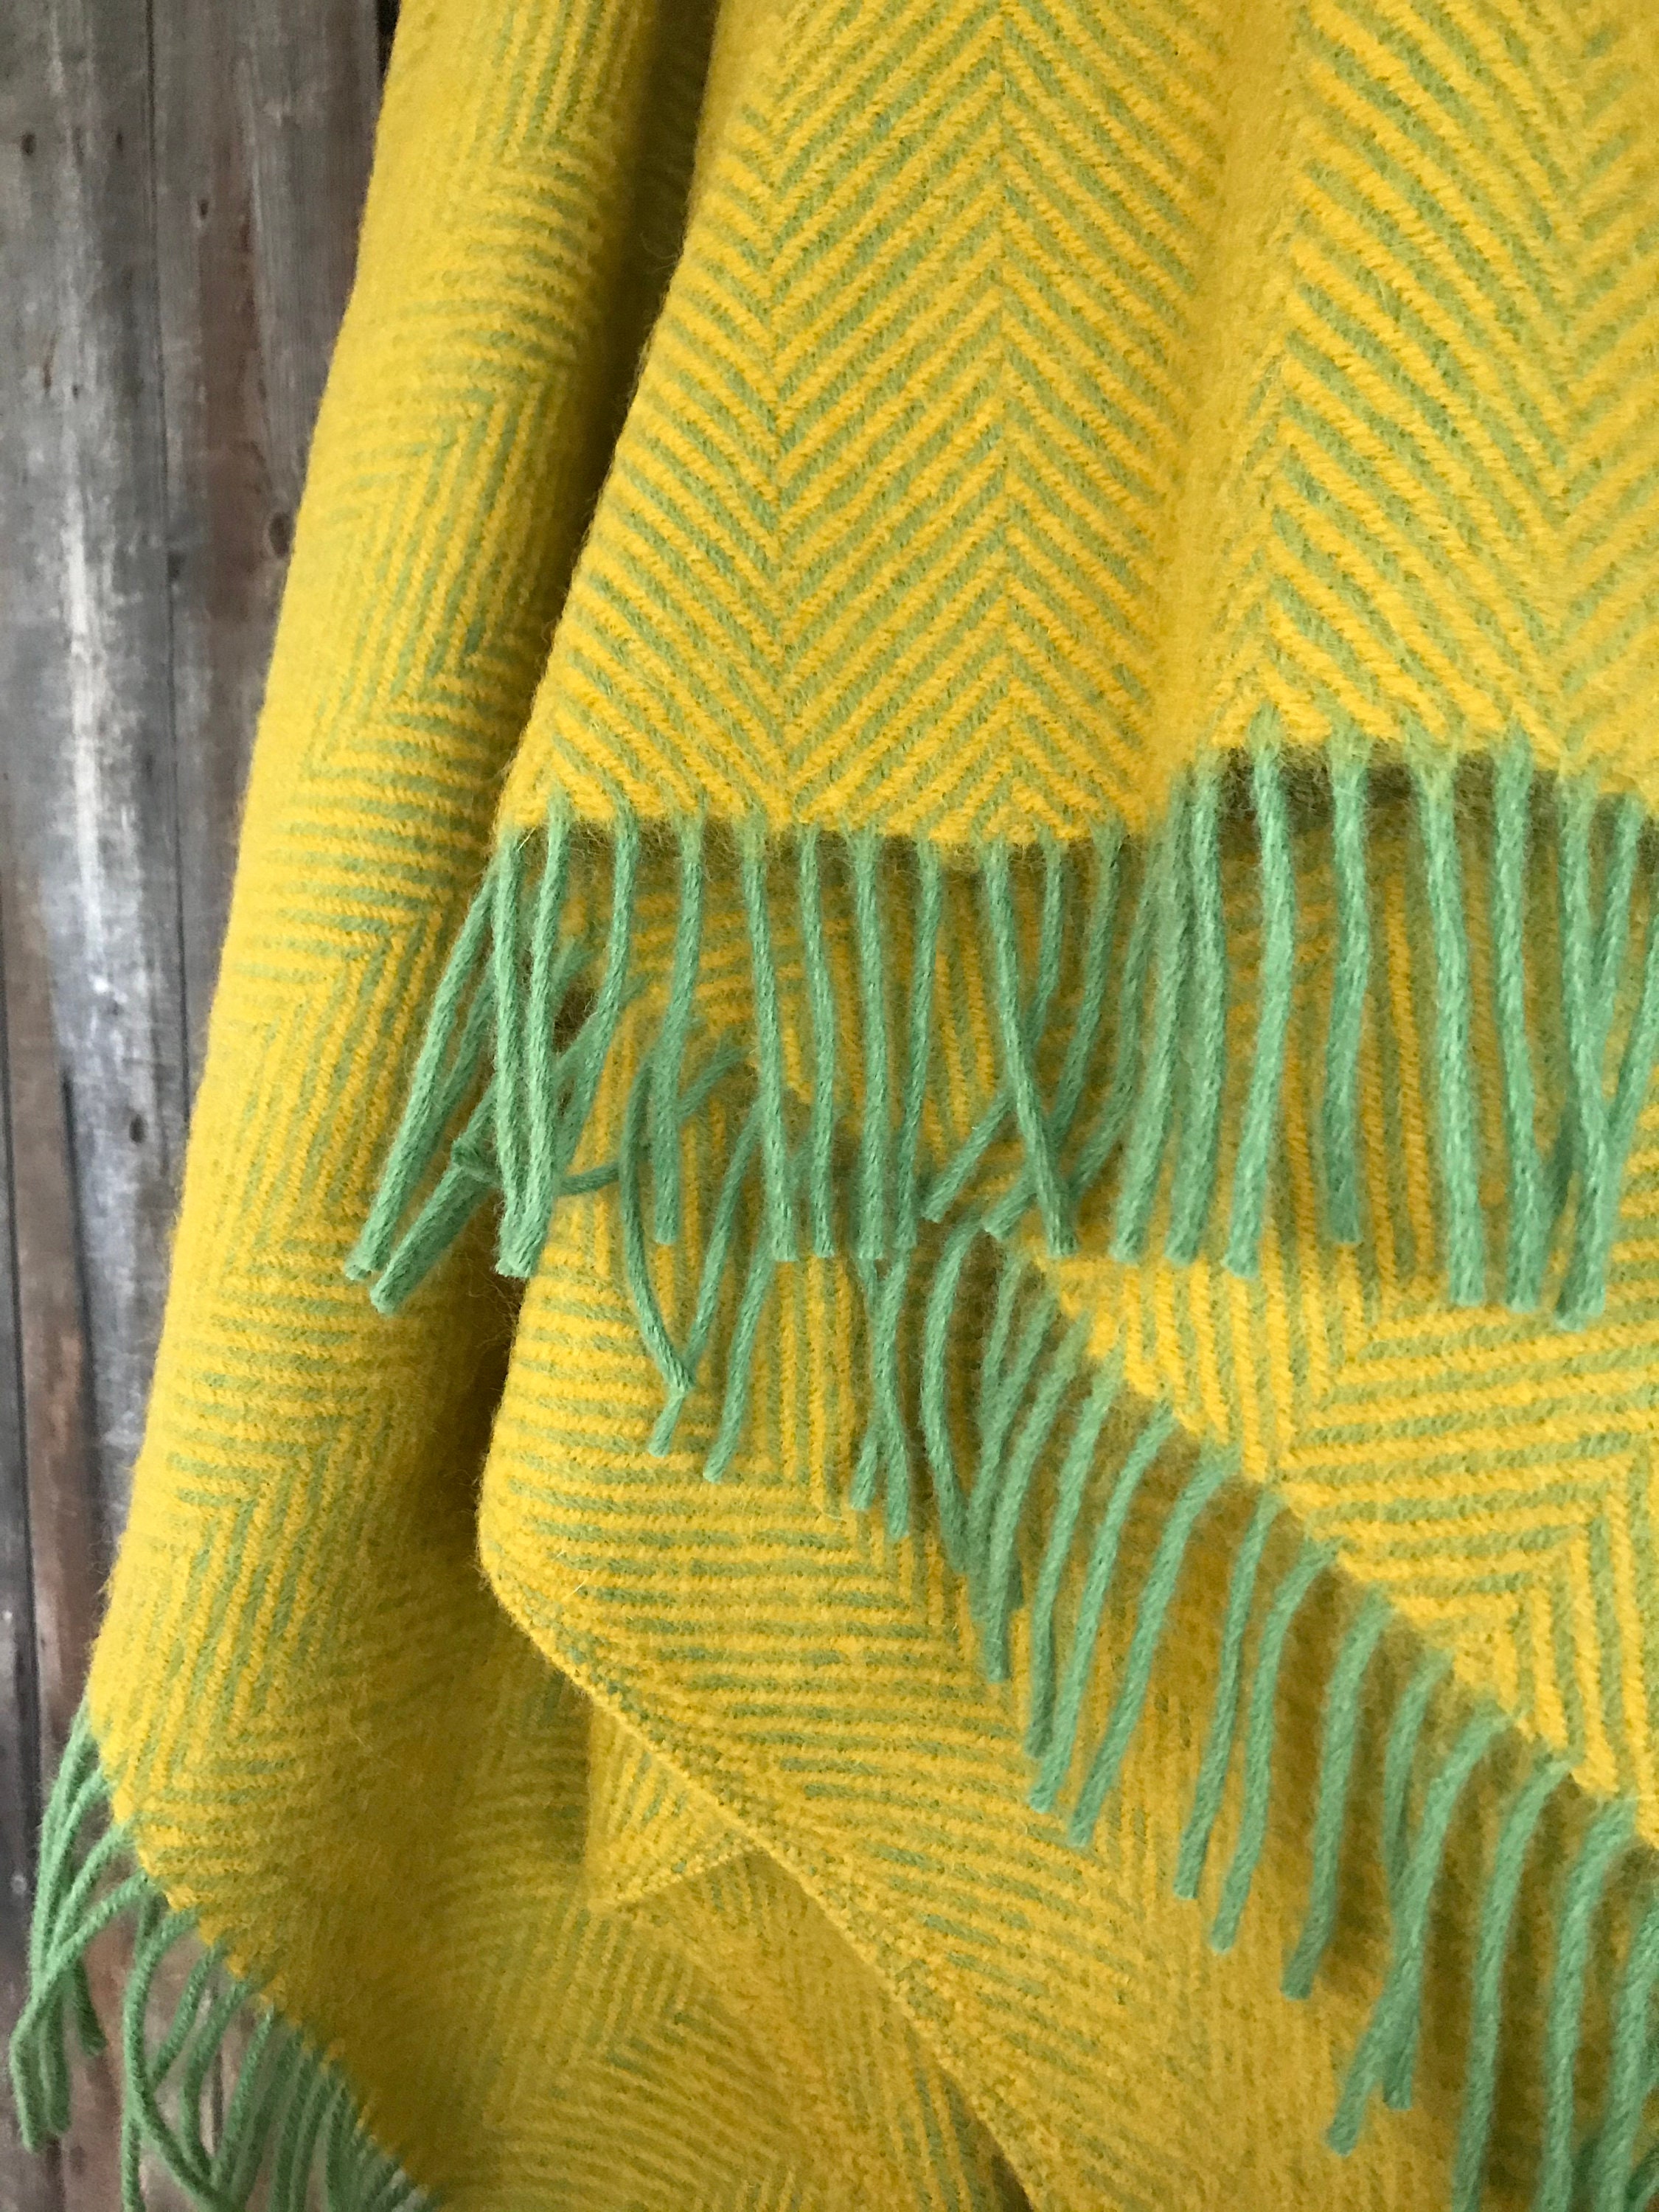 Mustard yellow wool throw blanket with green fringes | Etsy